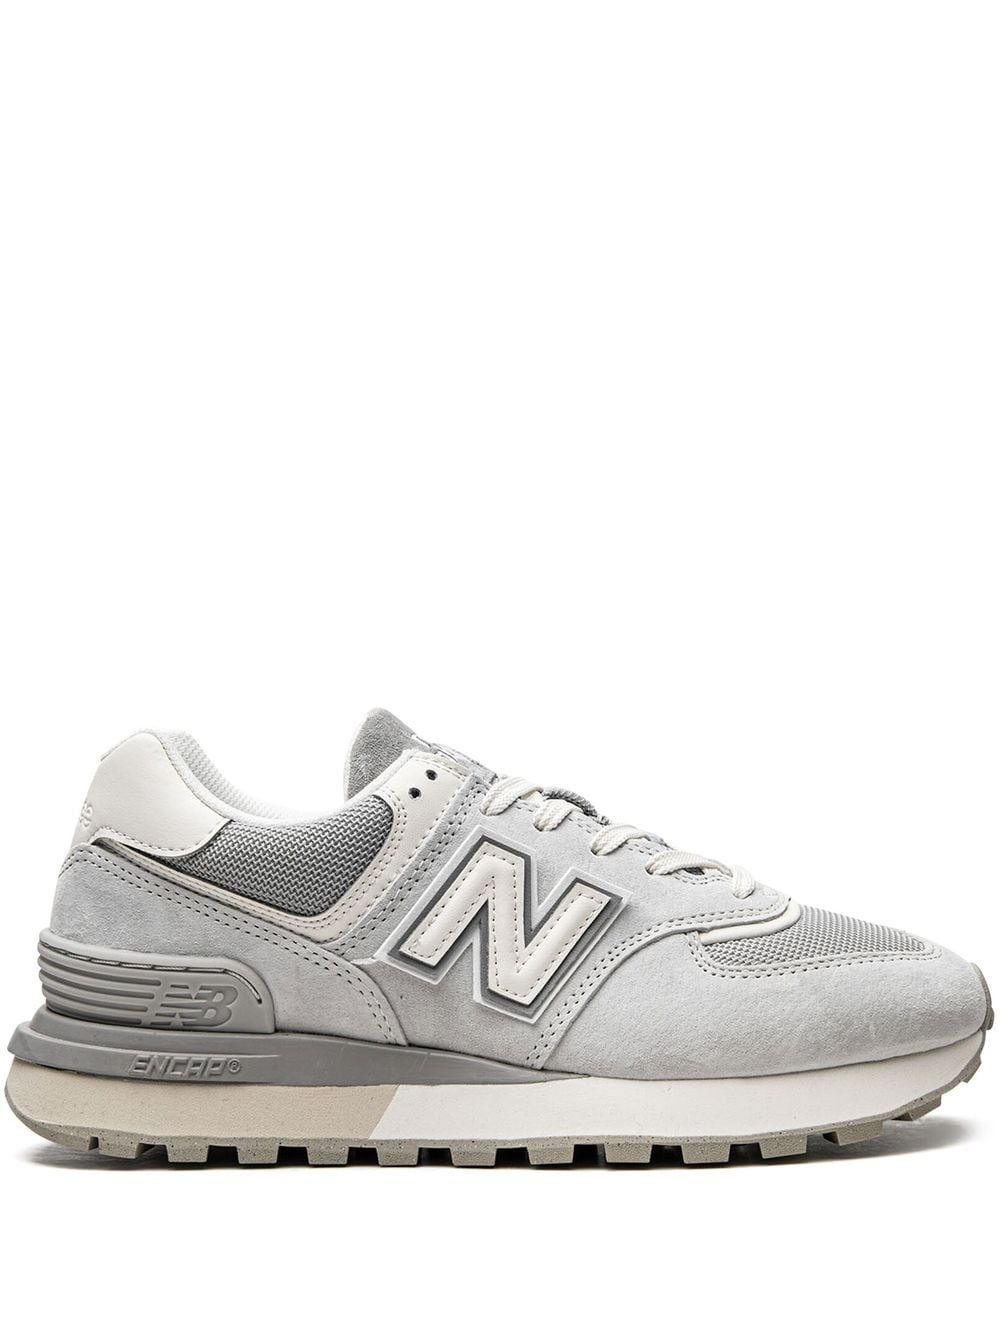 New Balance 574 Legacy low-top sneakers - Grey